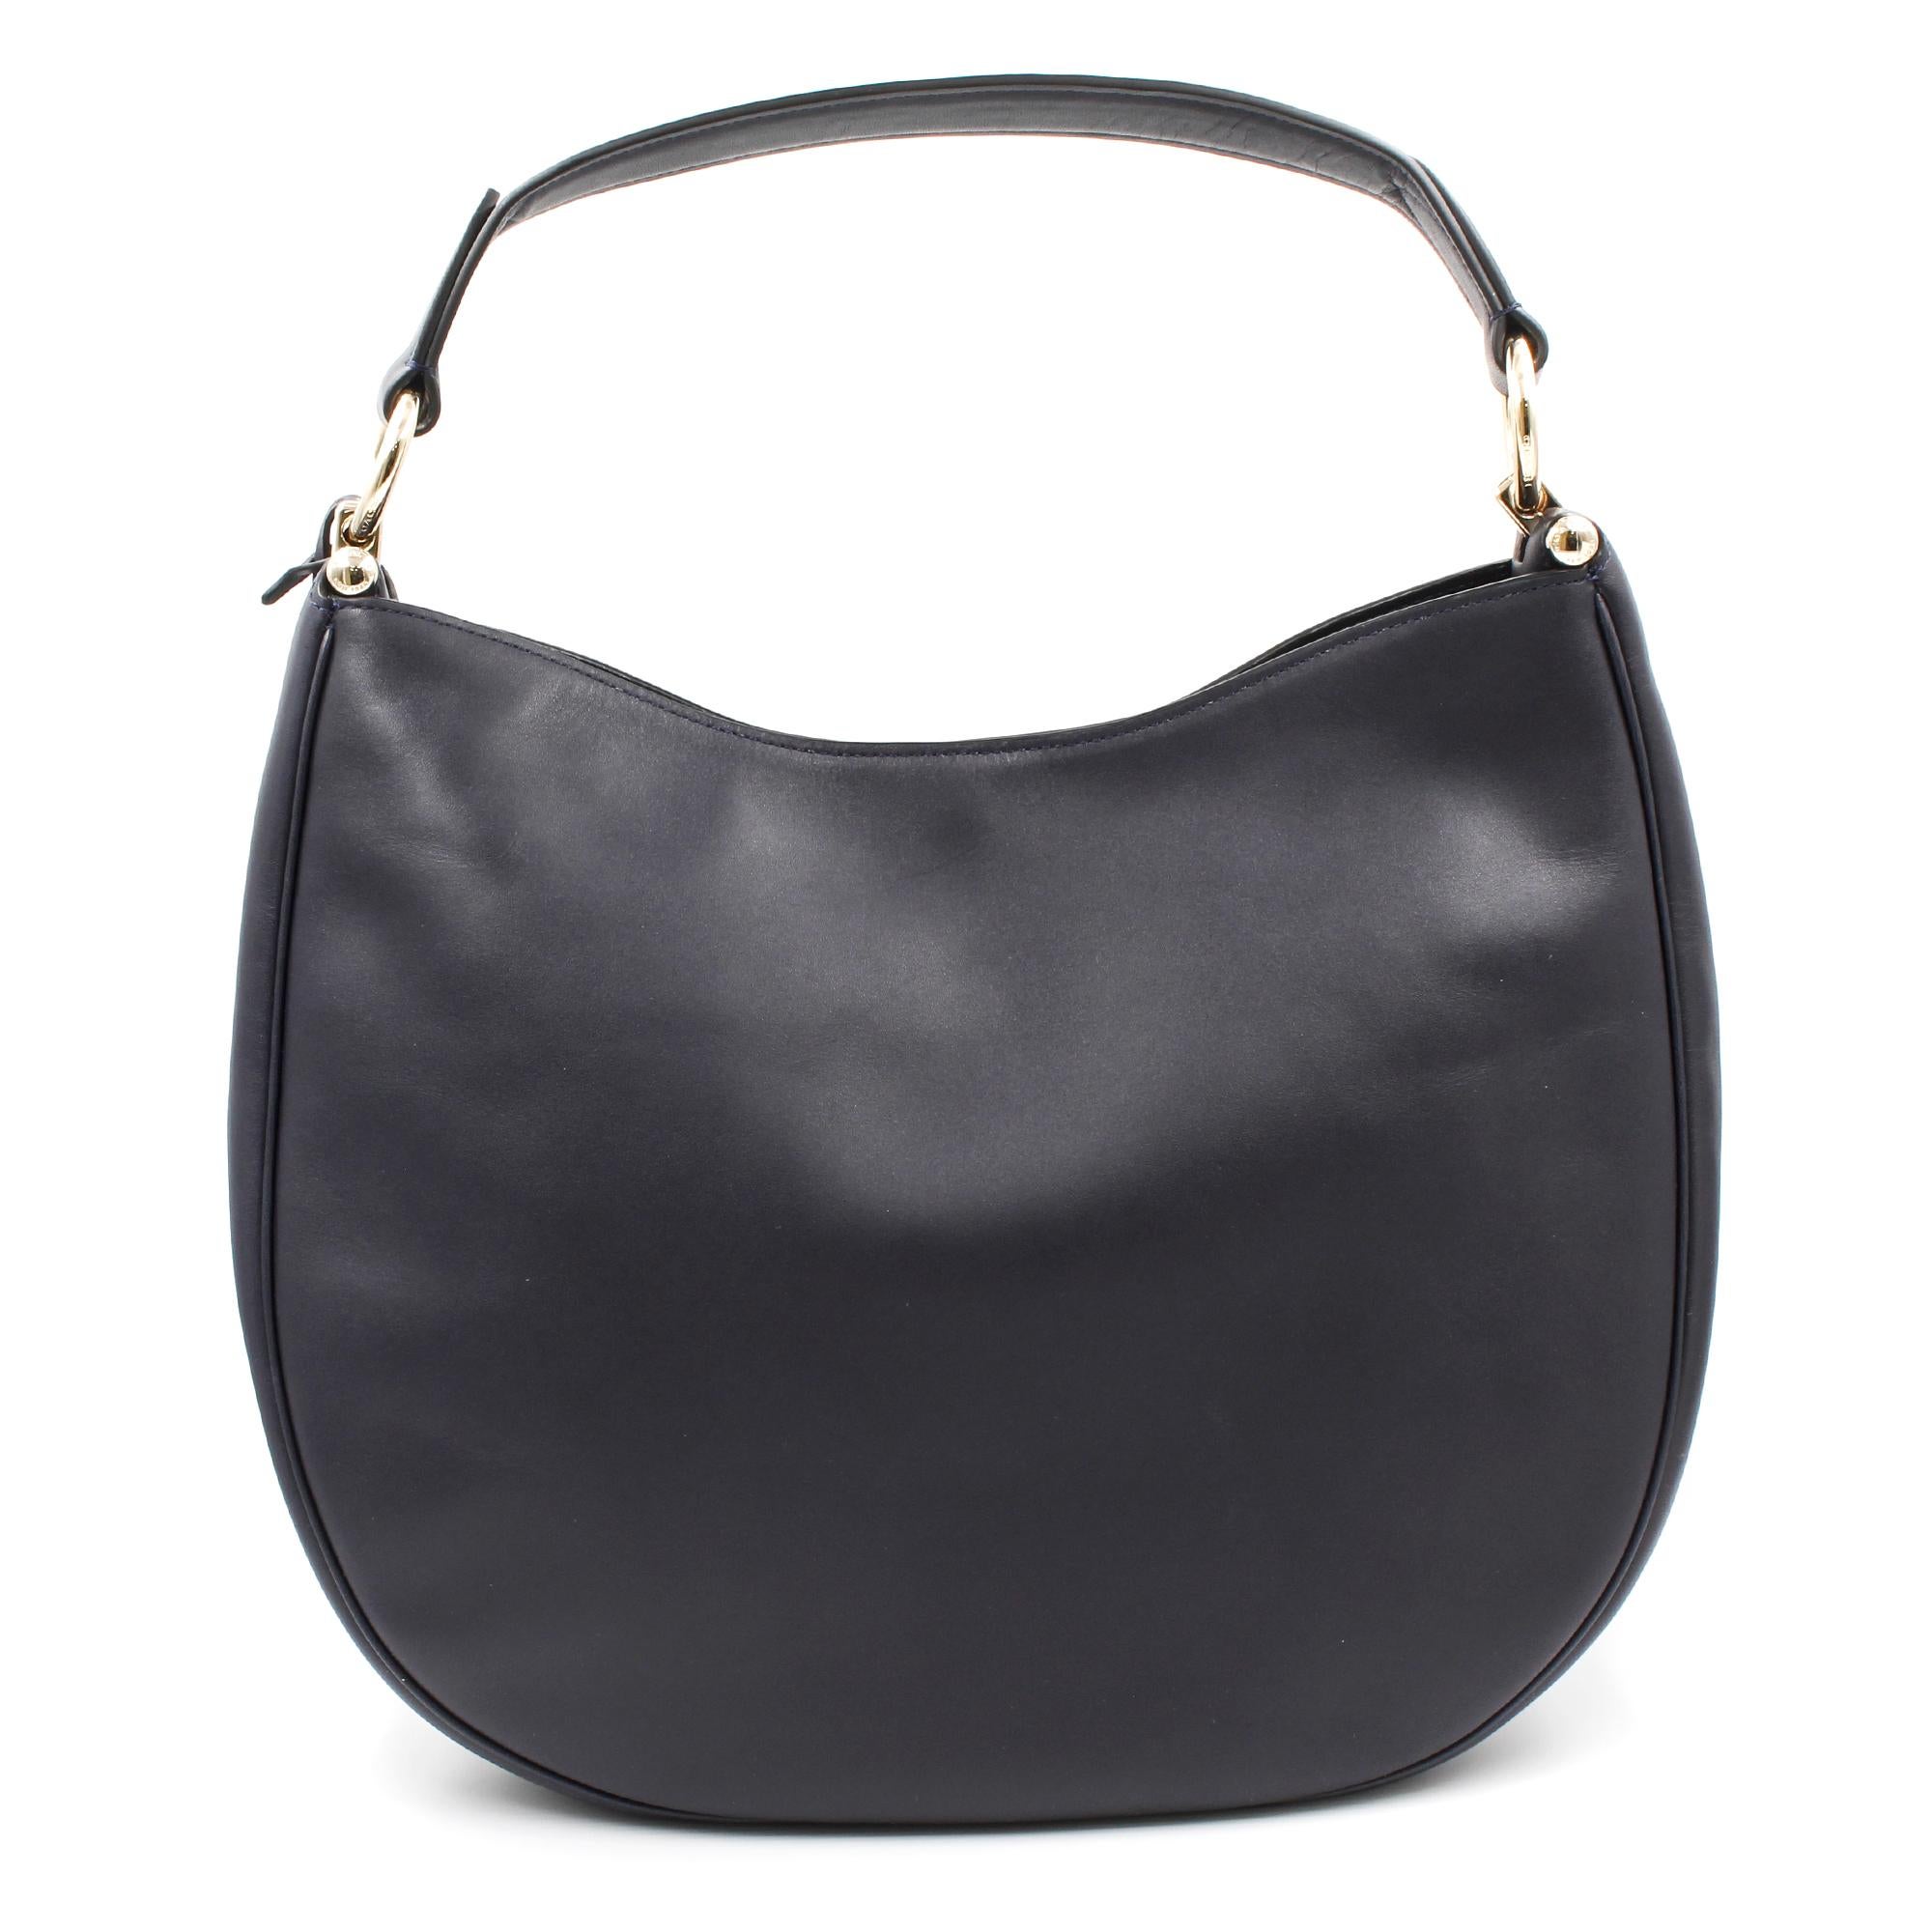 Soft and slouchy in supple glove-tanned leather, this simple, graceful silhouette is dressed up with striking hardware, including a Gold Tone metal bag charm. Featuring multiple wear straps to polish off any look.
Made of leather.
Magnetic snap